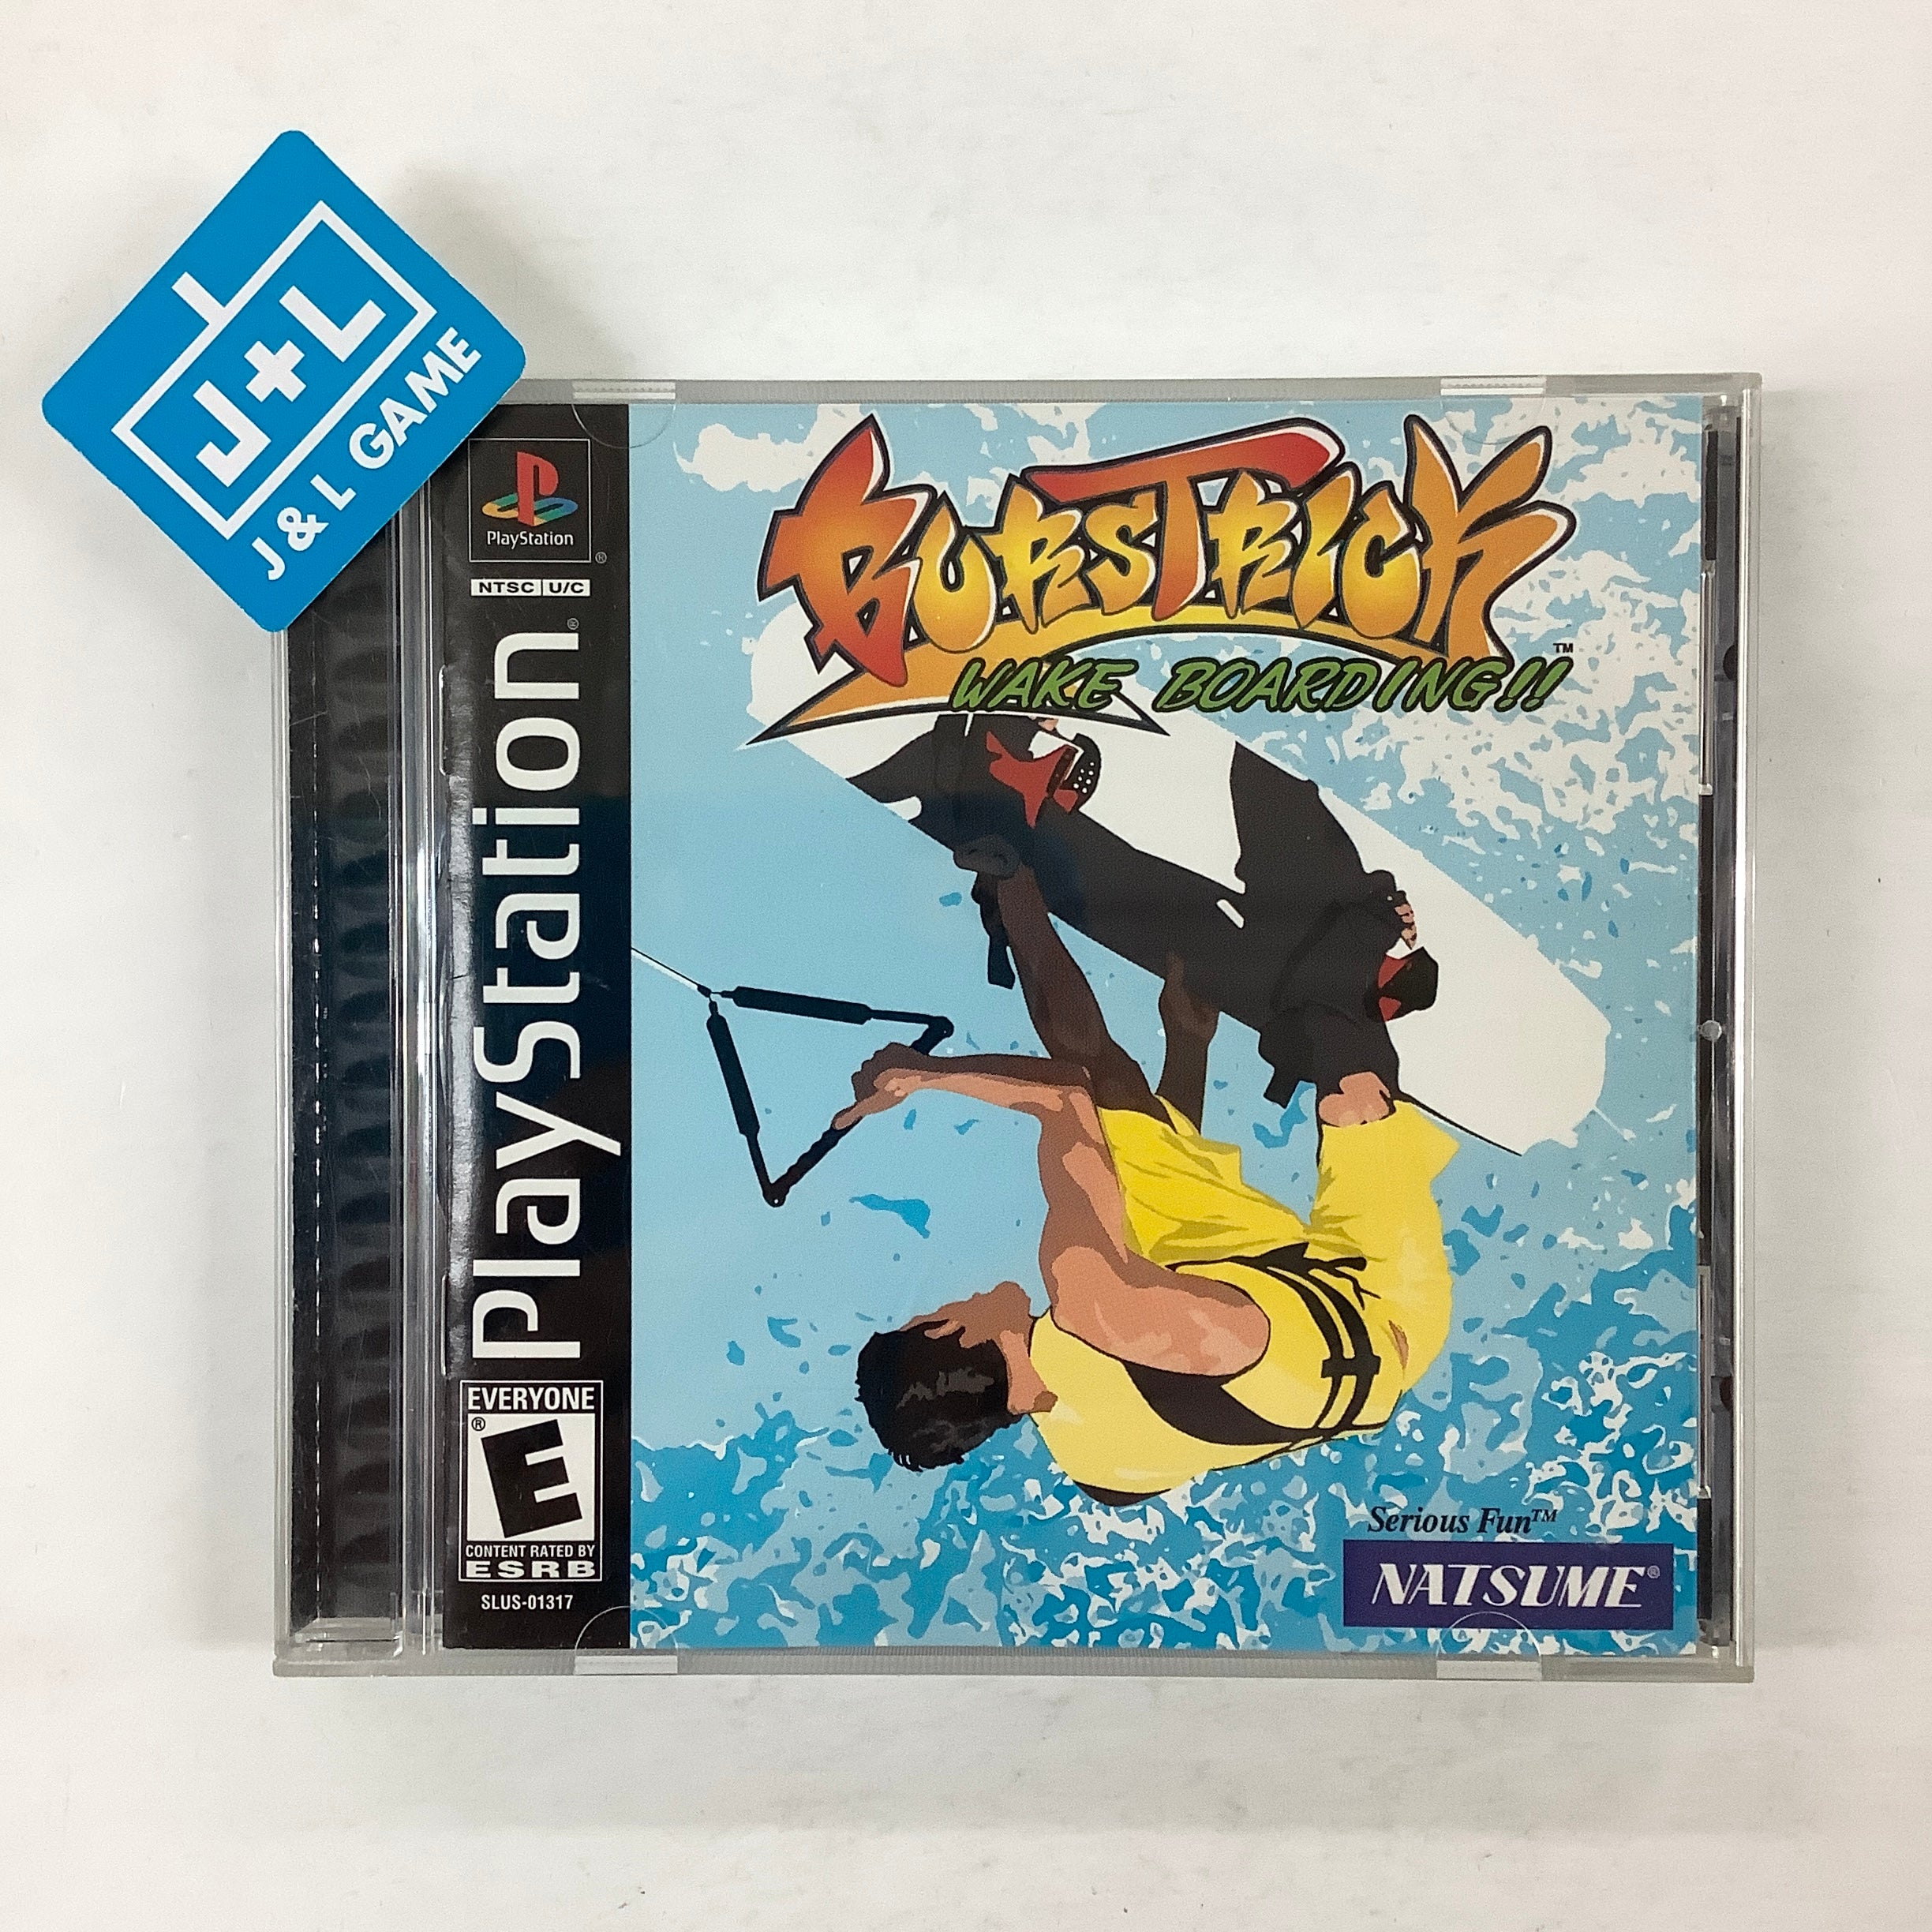 Burstrick: Wake Boarding!! - (PS1) PlayStation 1 [Pre-Owned] Video Games Natsume   